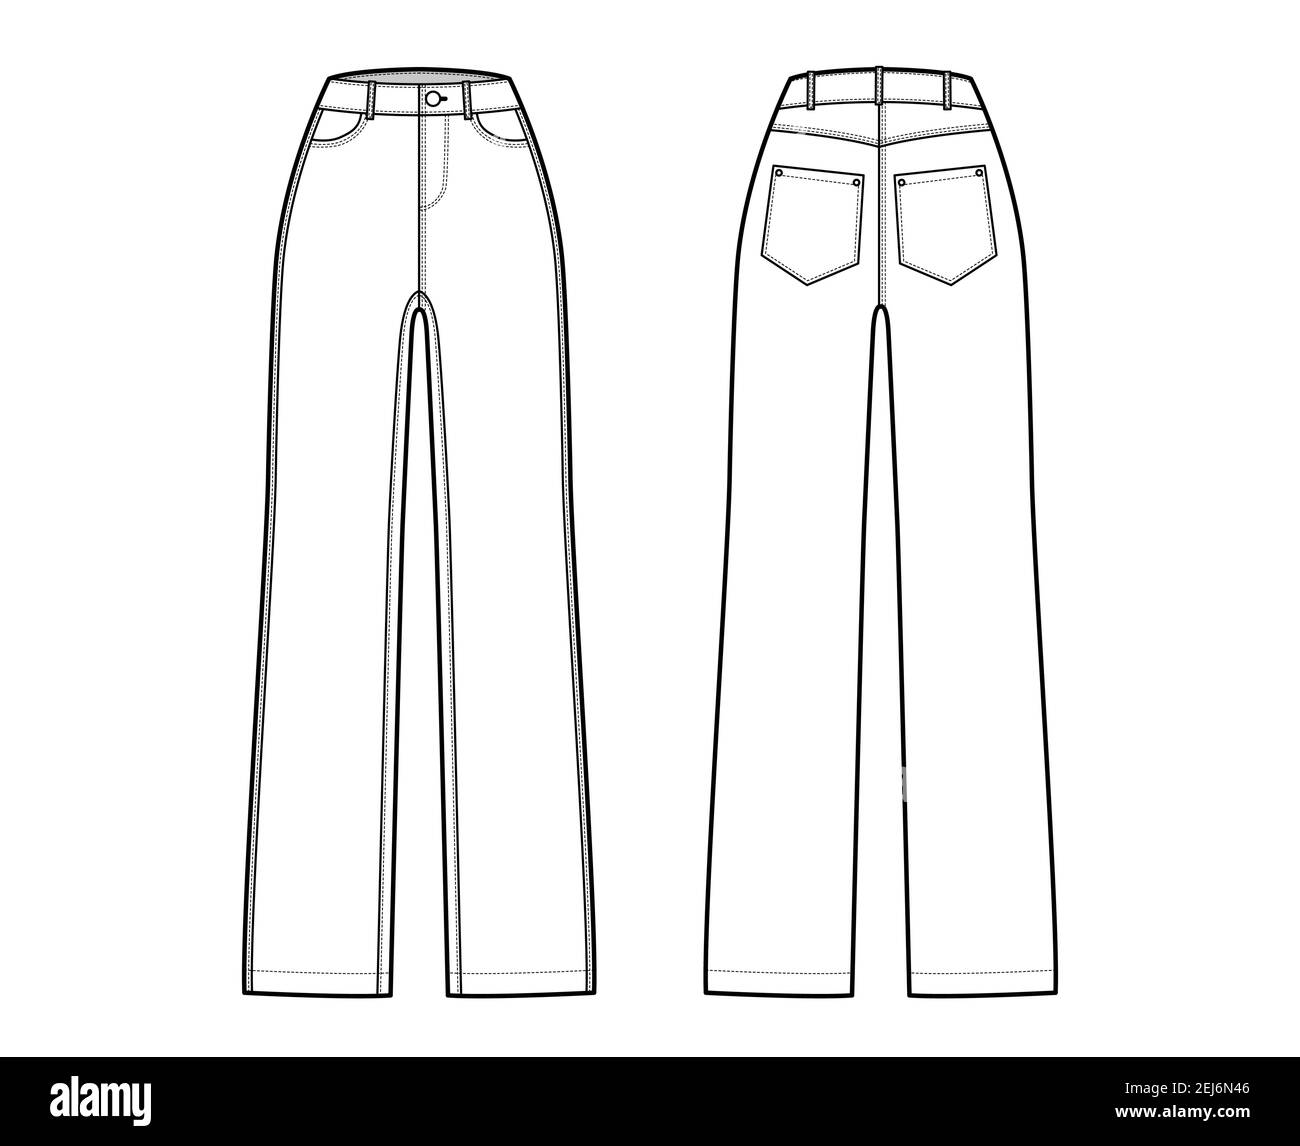 Straight Jeans Denim pants technical fashion illustration with full length,  normal waist, high rise, 5 pockets,